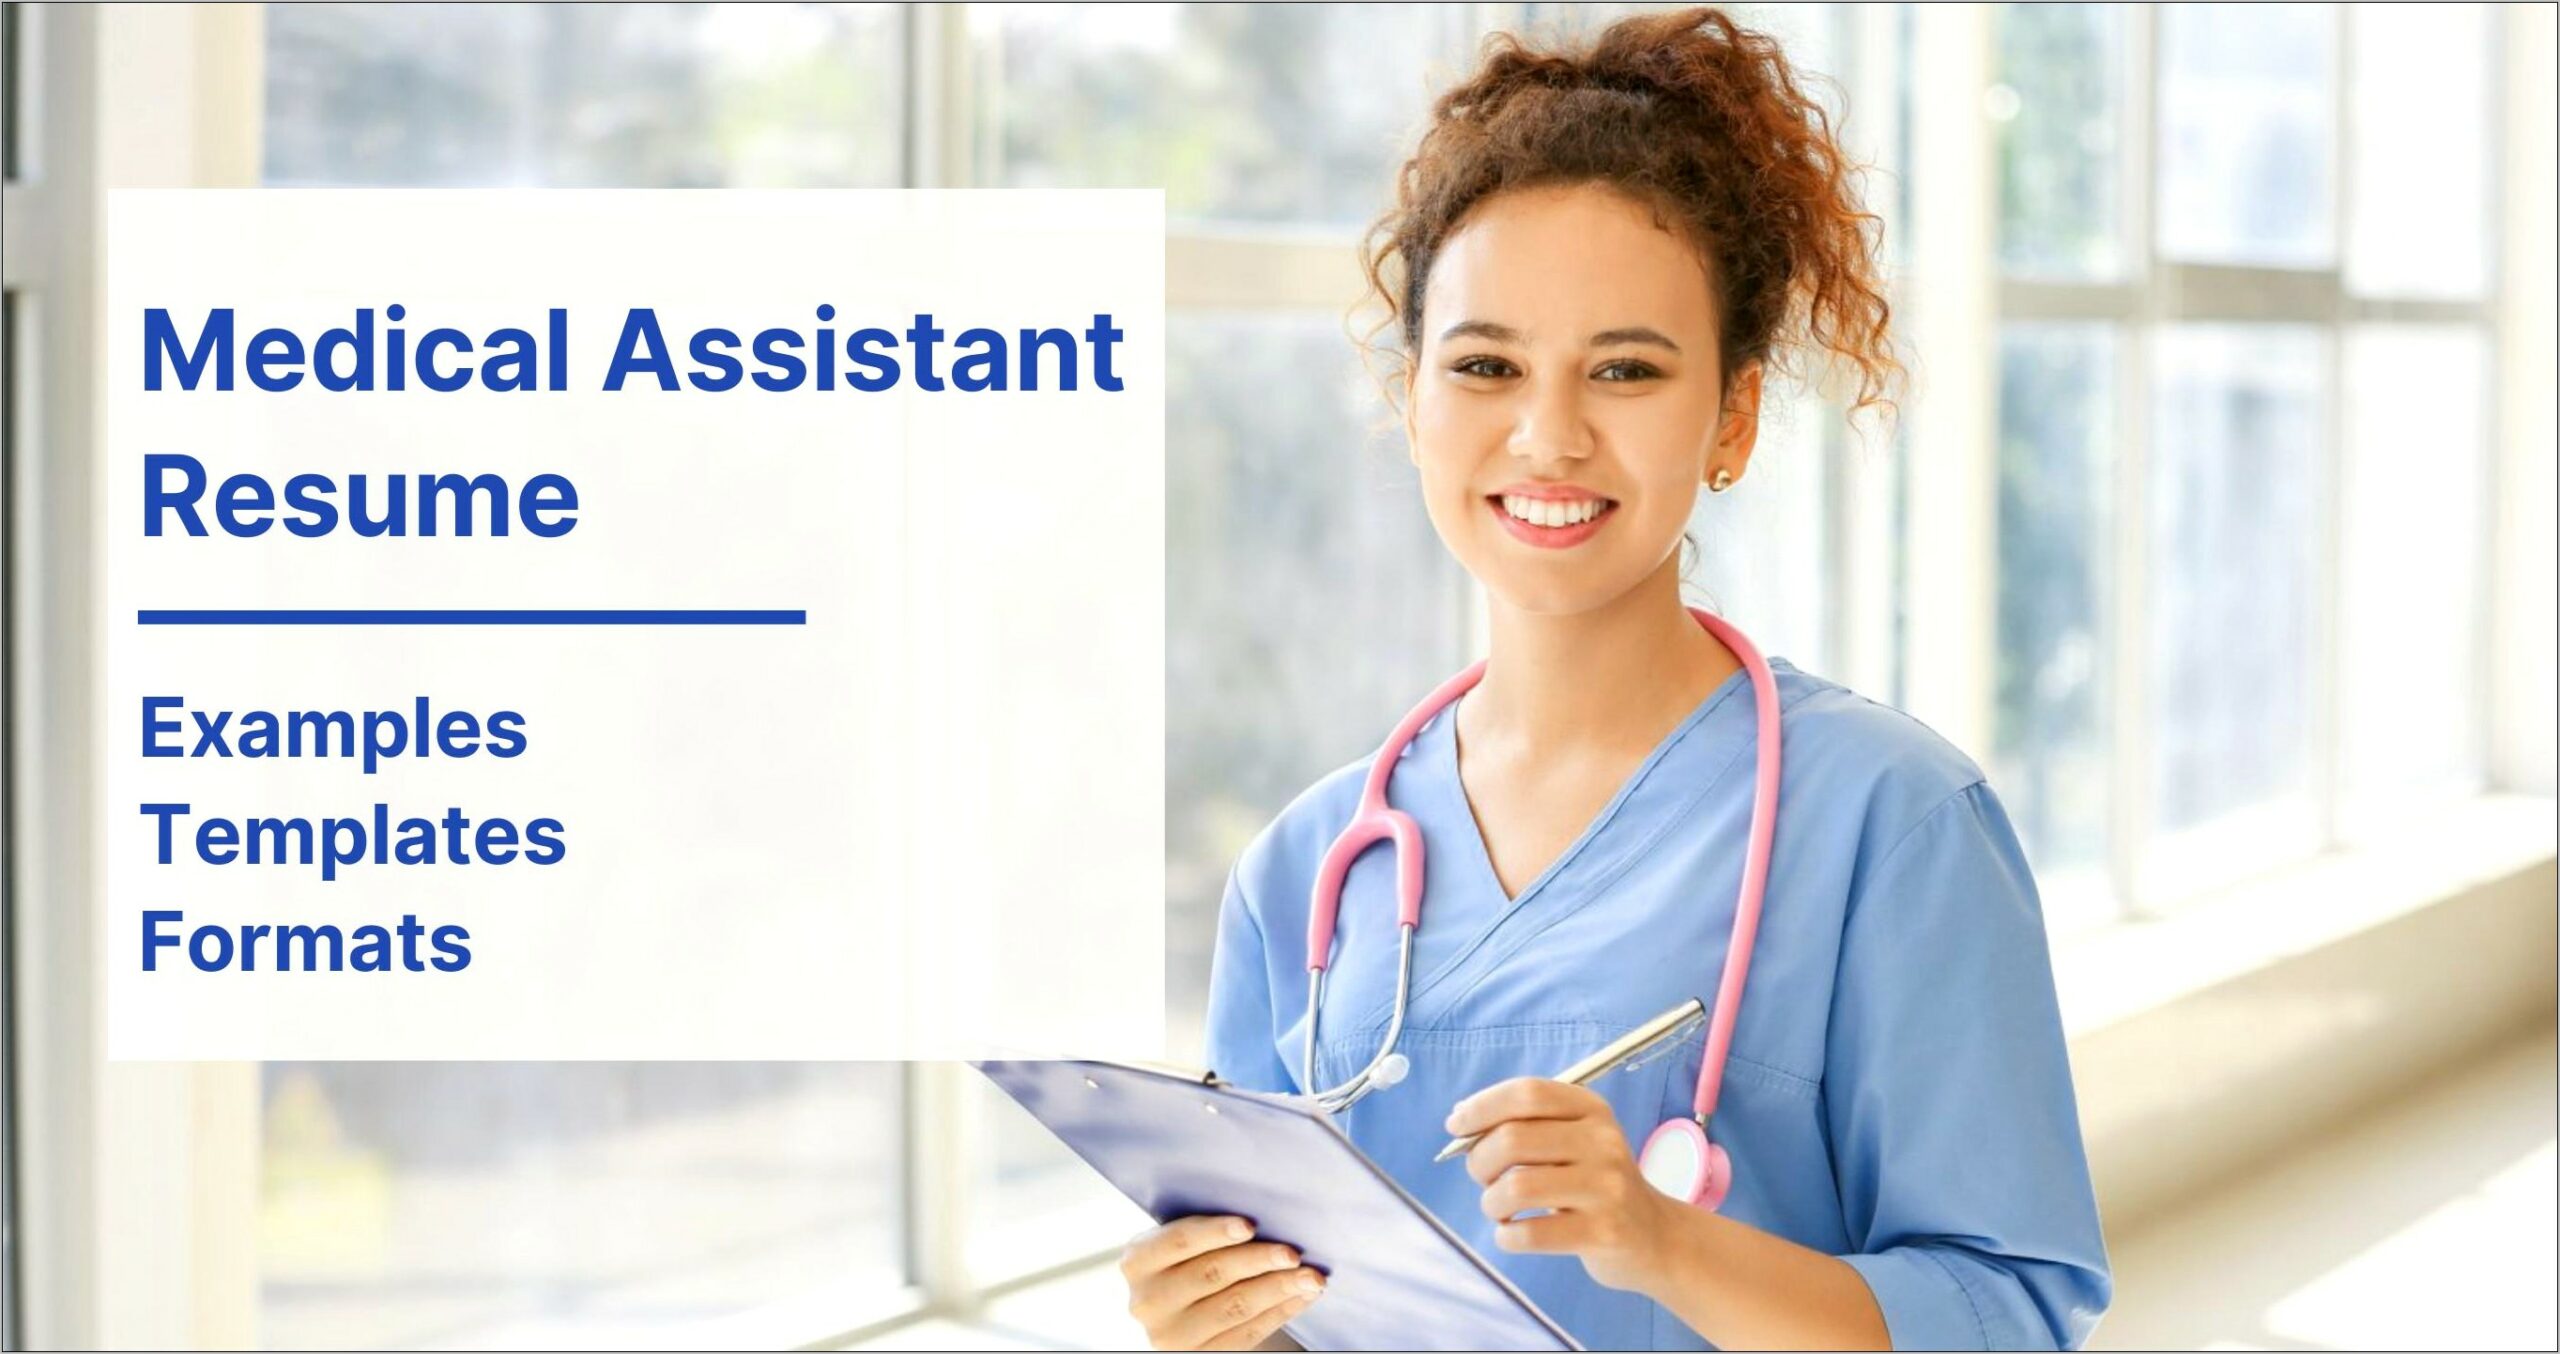 Medical Assistant Sample Resume Summary